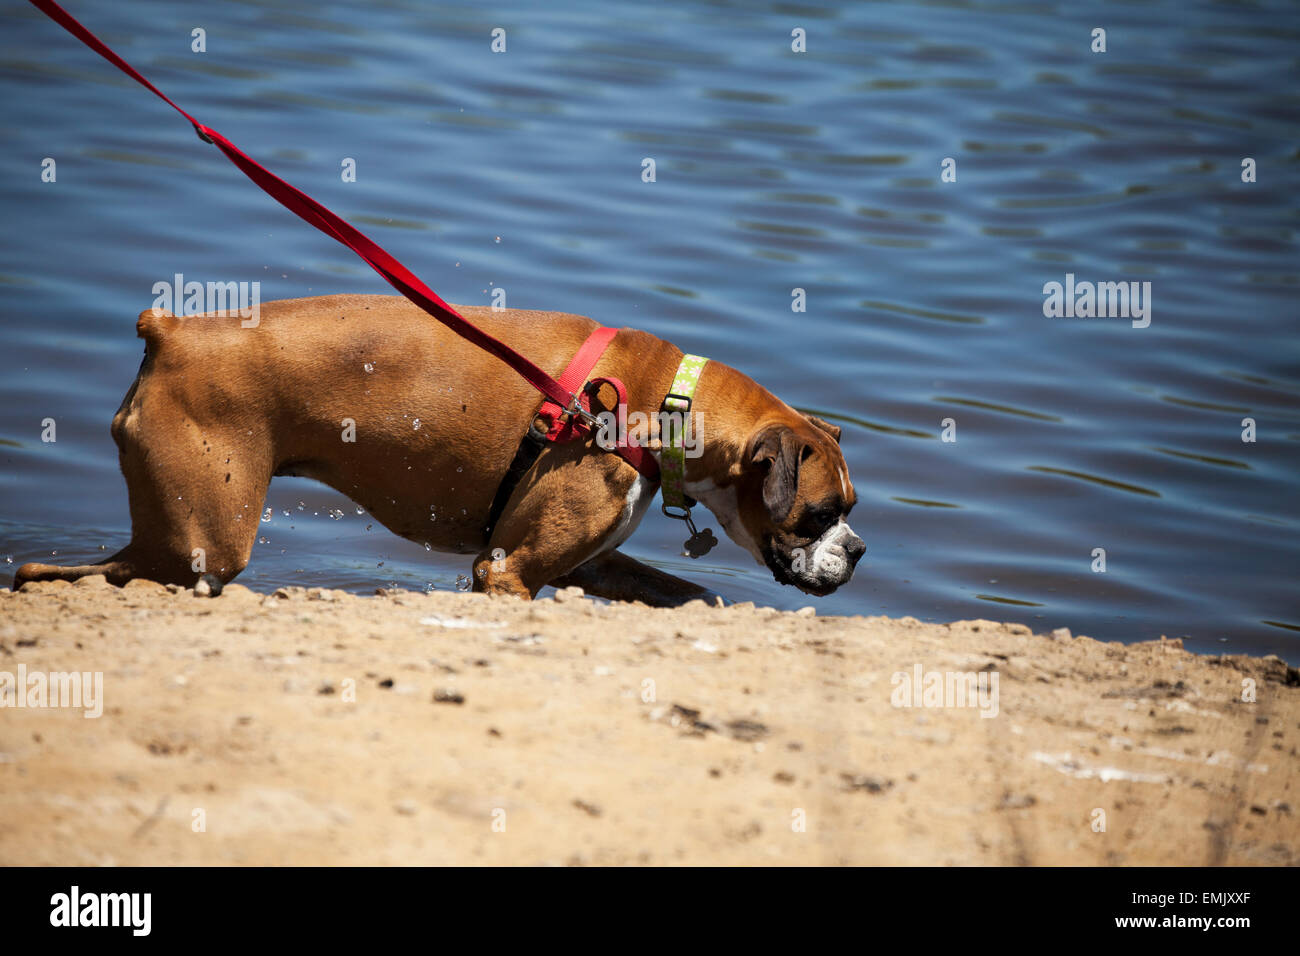 Boxer dog playing in the water, Novato, Marin County, California, USA Stock Photo